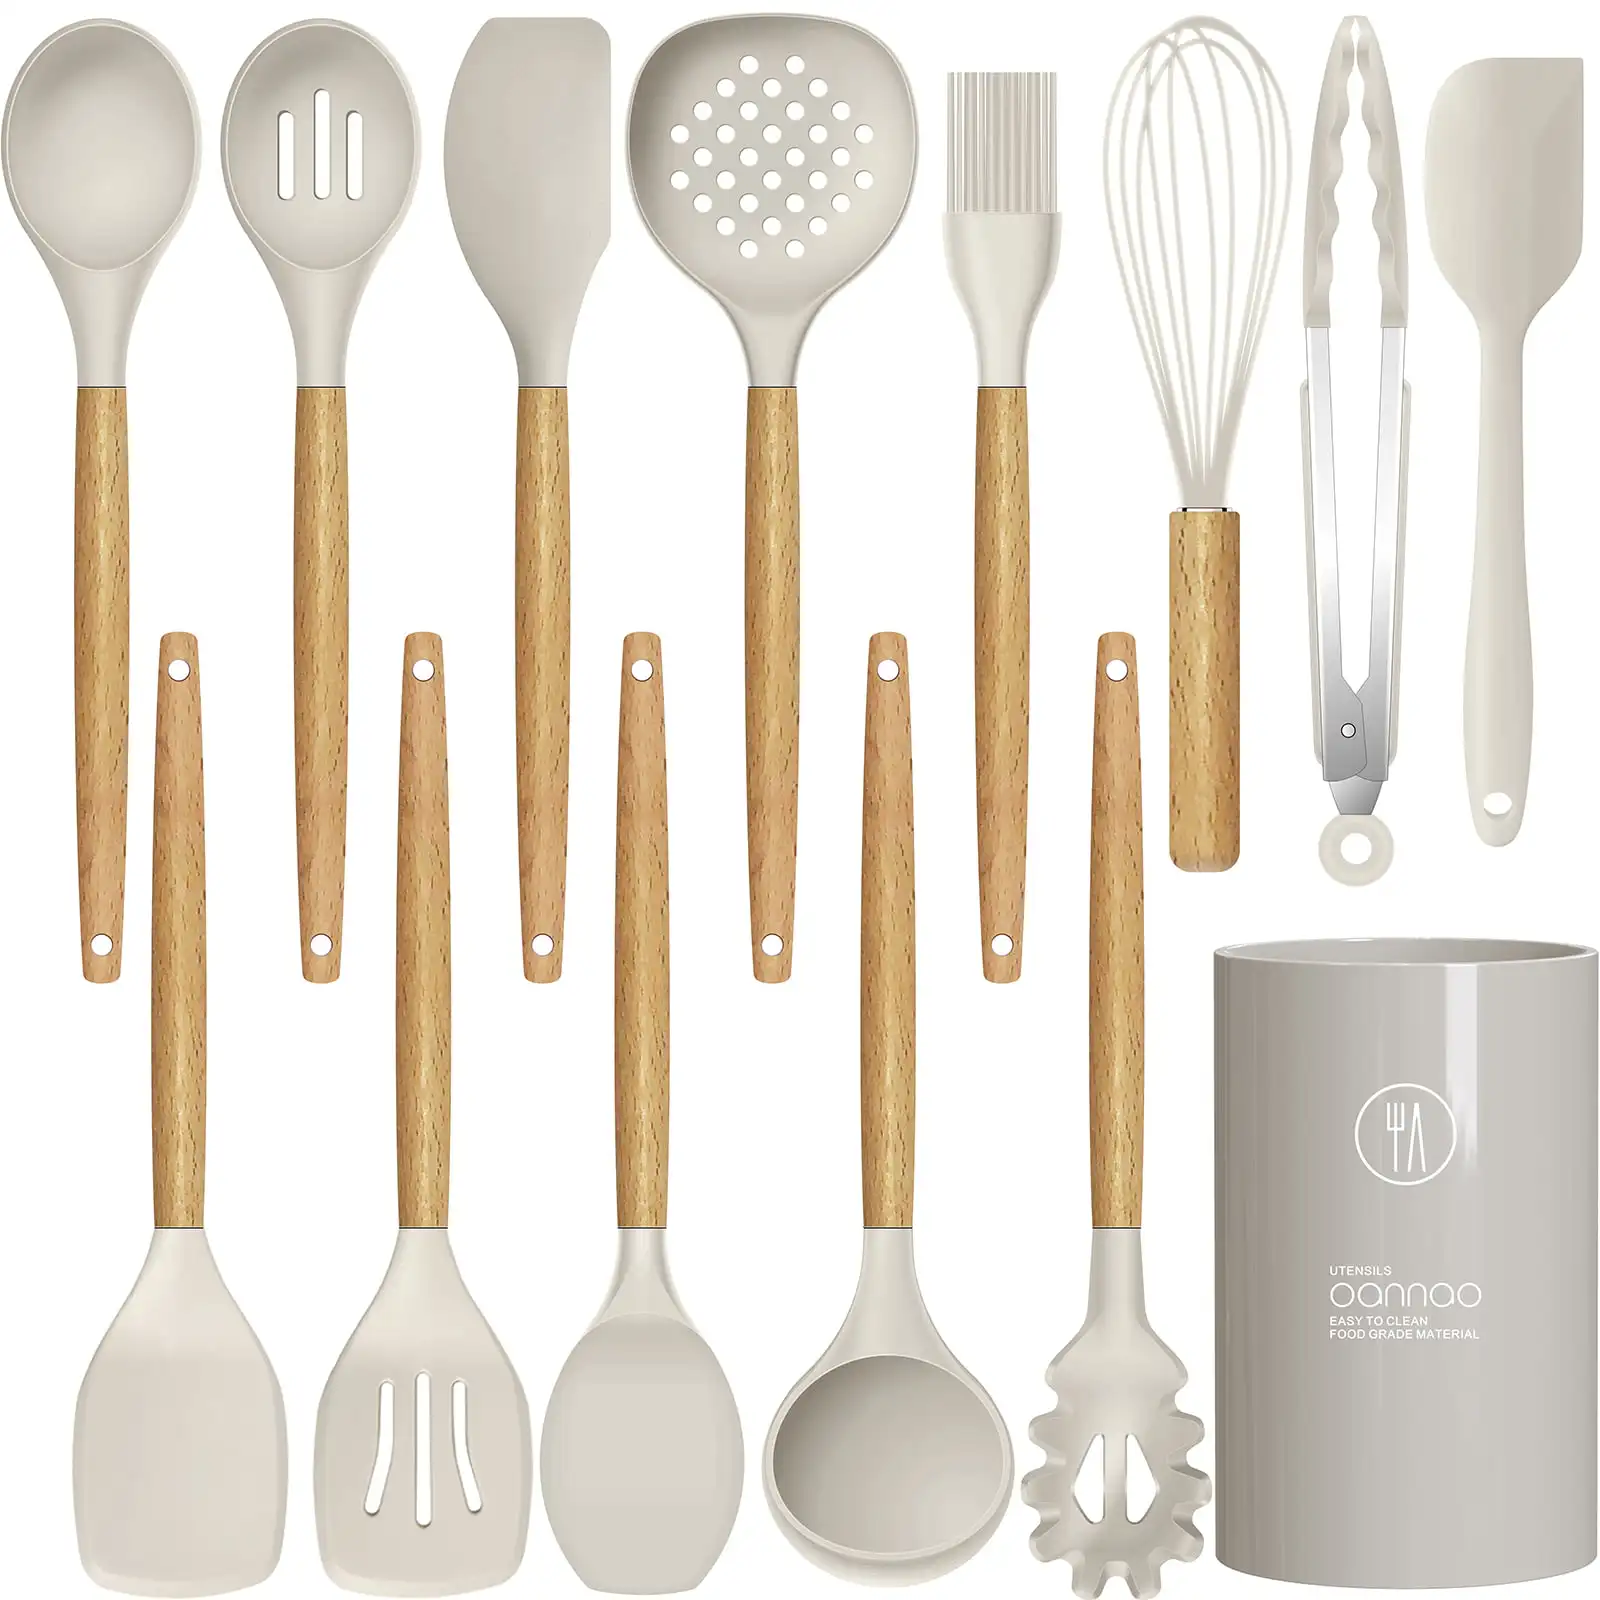 

Silicone Cooking Utensils Kitchen Utensil Set - 446°F Heat Resistant,Turner Tongs,Spatula,Spoon,Brush,Whisk. Wooden Handles Kha